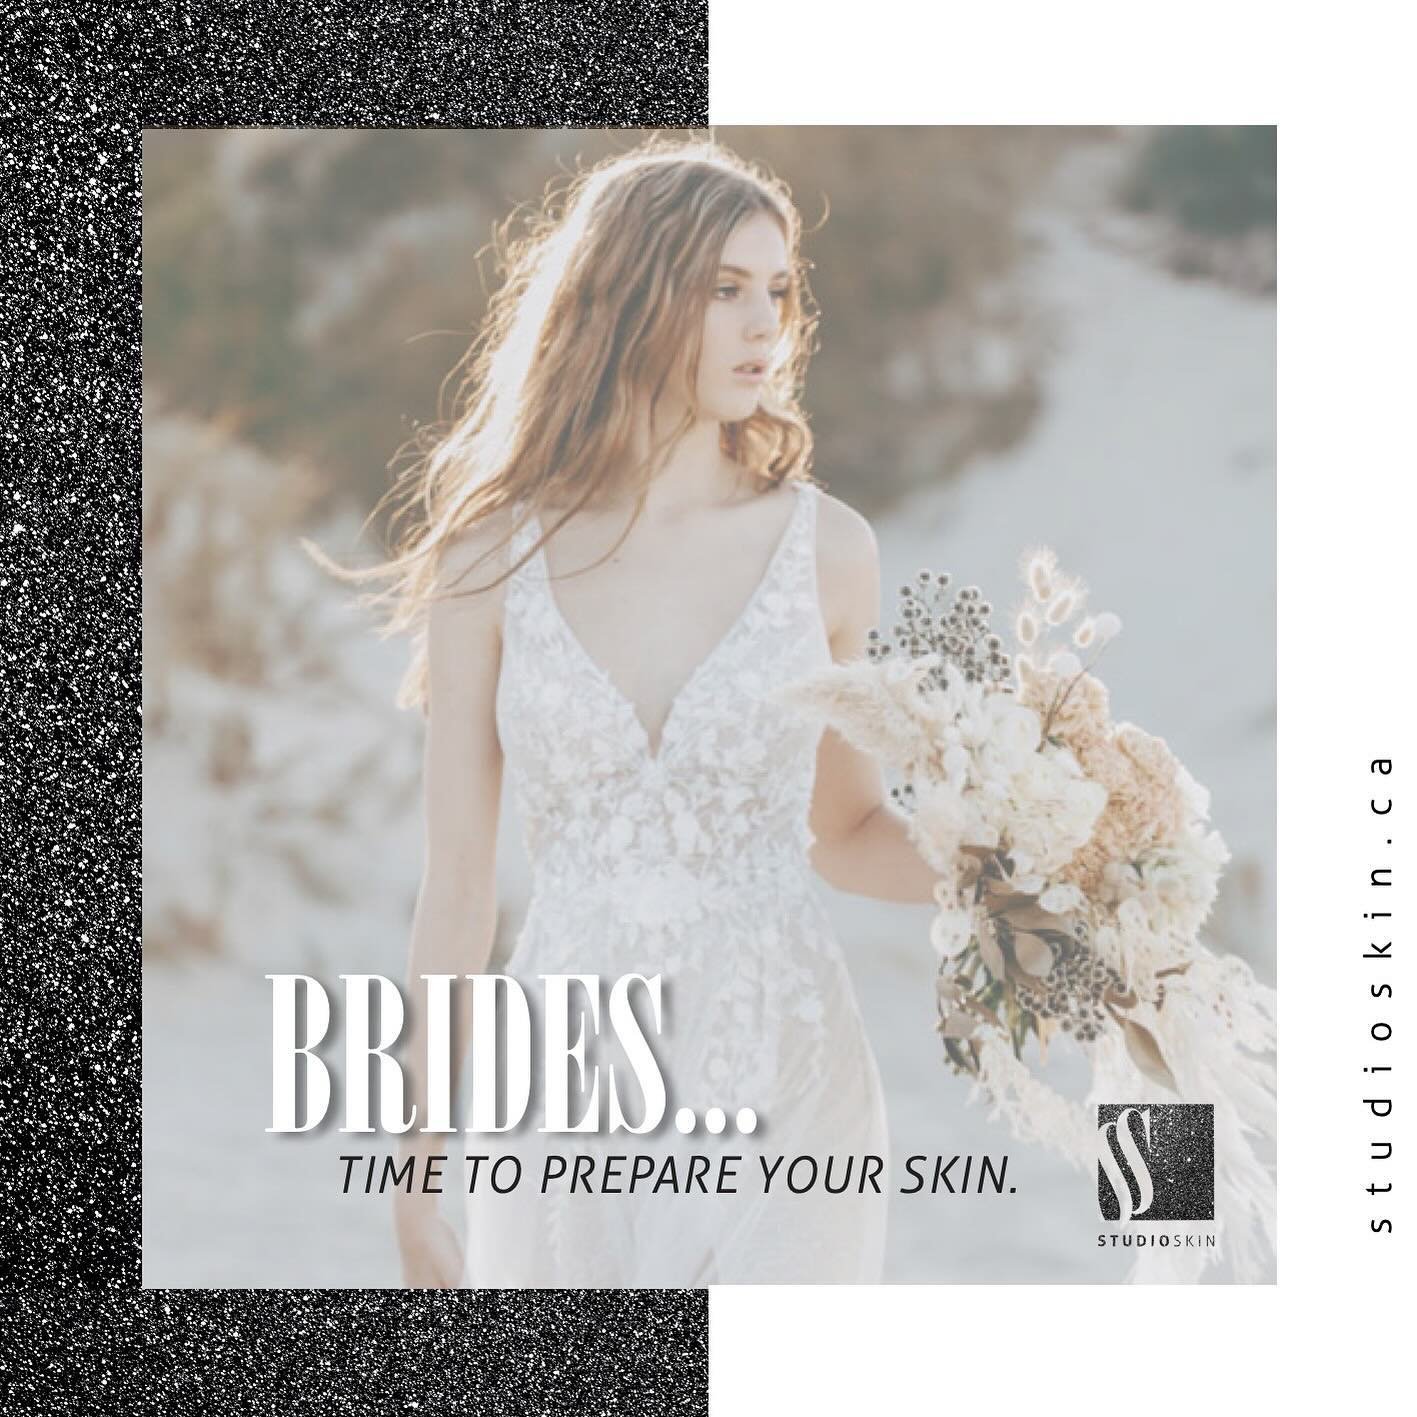 As a bride, time is your best friend when it comes to preparing your skin for the big day. Establishing a consistent skincare routine months in advance can help ensure a radiant complexion. From hydrated skin to regular exfoliation with our Hydrafaci